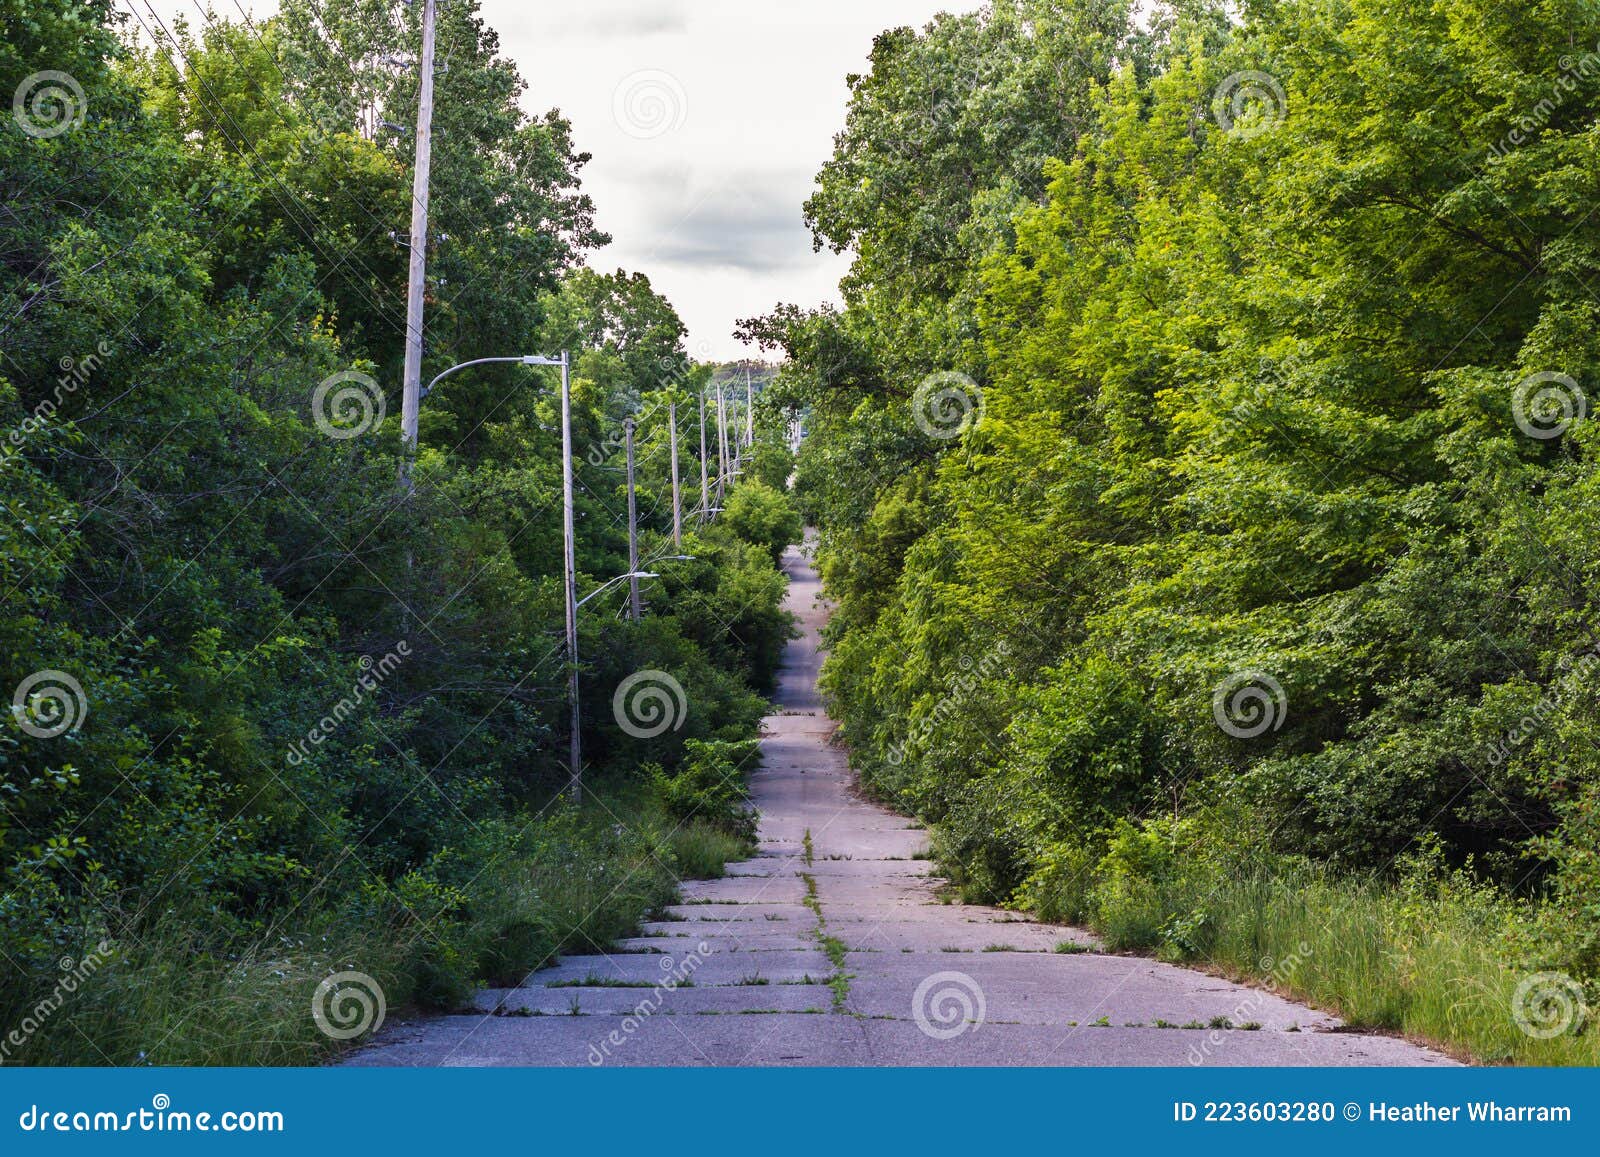 abandoned road with streetlights surrounded by verdant forest reclaiming land